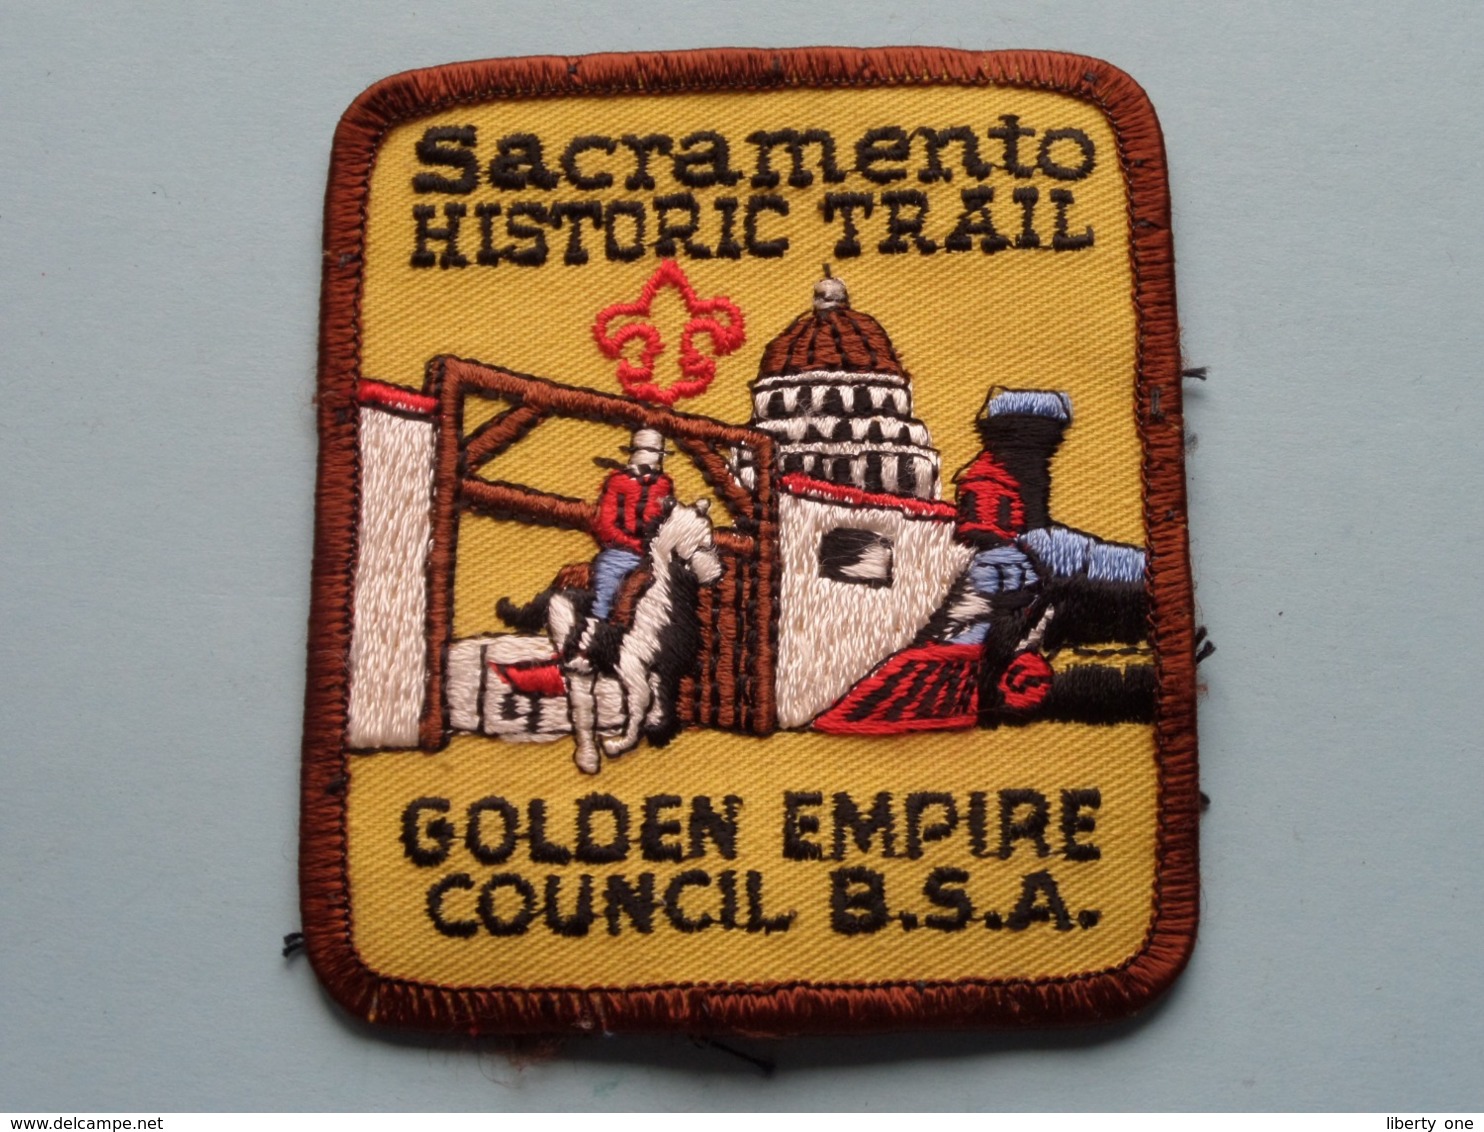 SACRAMENTO HISTORIC TRAIL > GOLDEN EMPIRE Council B.S.A. " SCOUTING " ( What You See Is What You Get > See Photo ) ! - Scoutisme